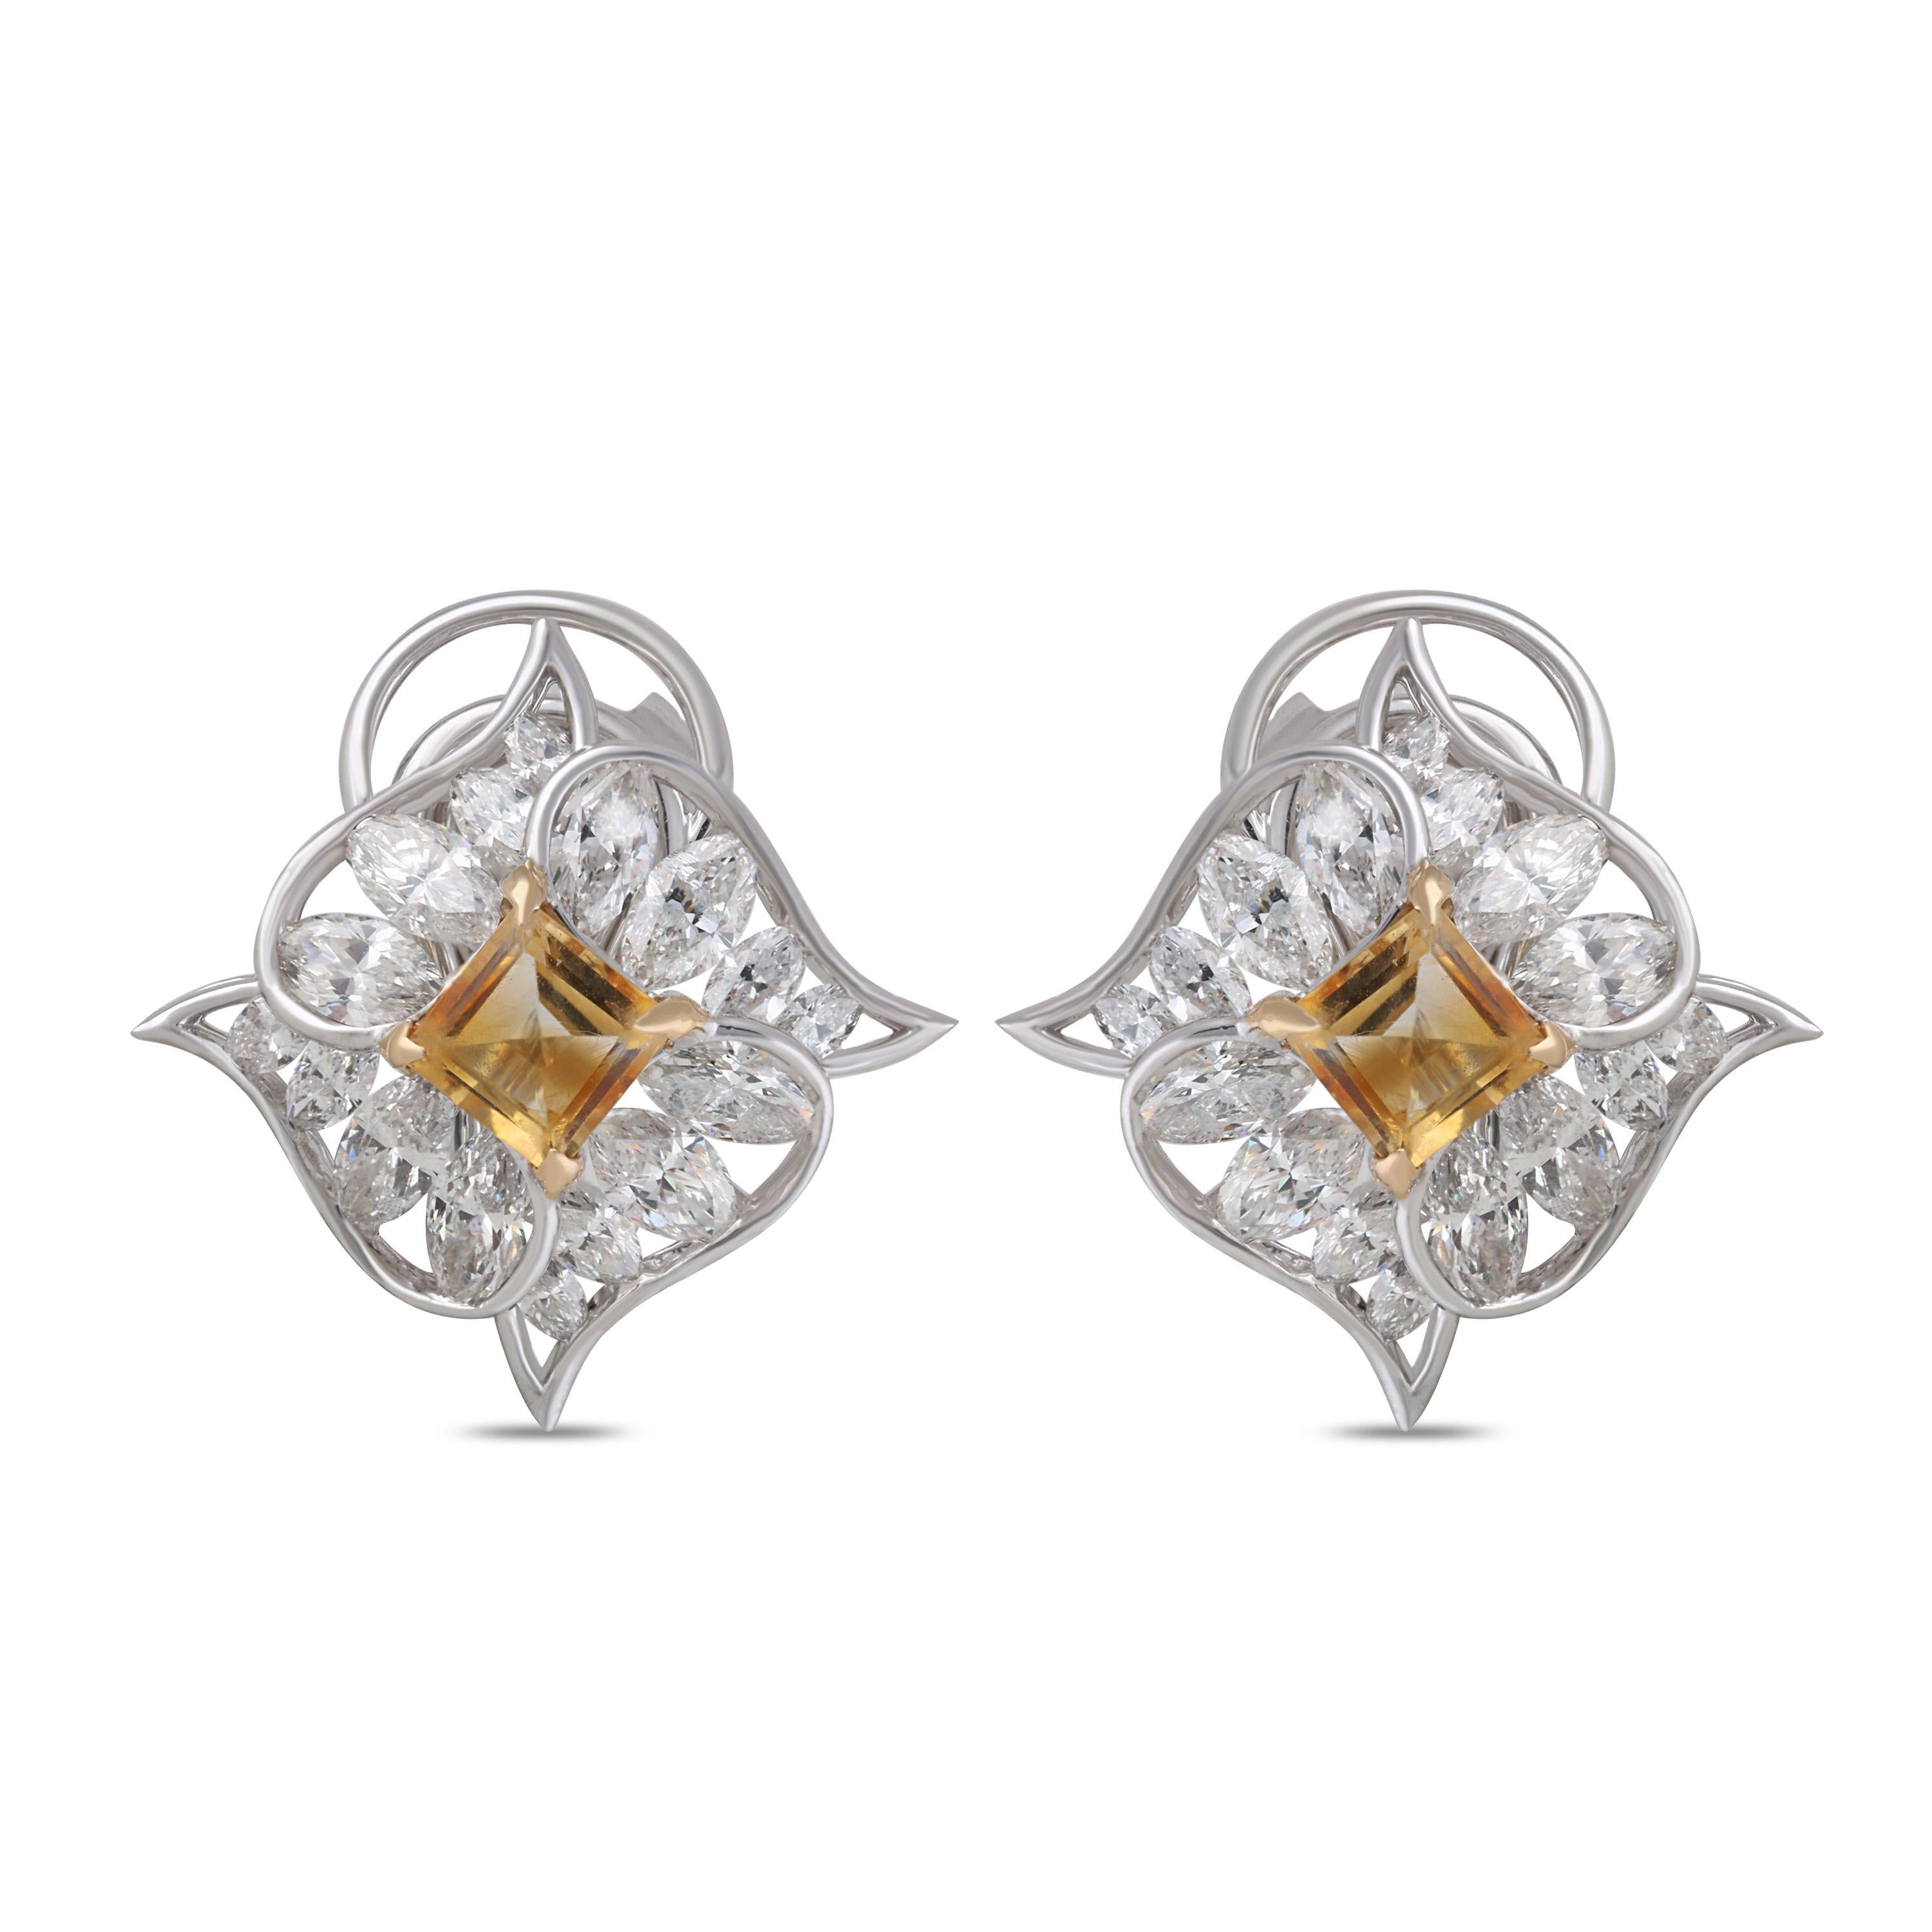 Studio Rêves Diamond with Citrine Stud Earrings in 18 Karat Gold In New Condition For Sale In Mumbai, Maharashtra